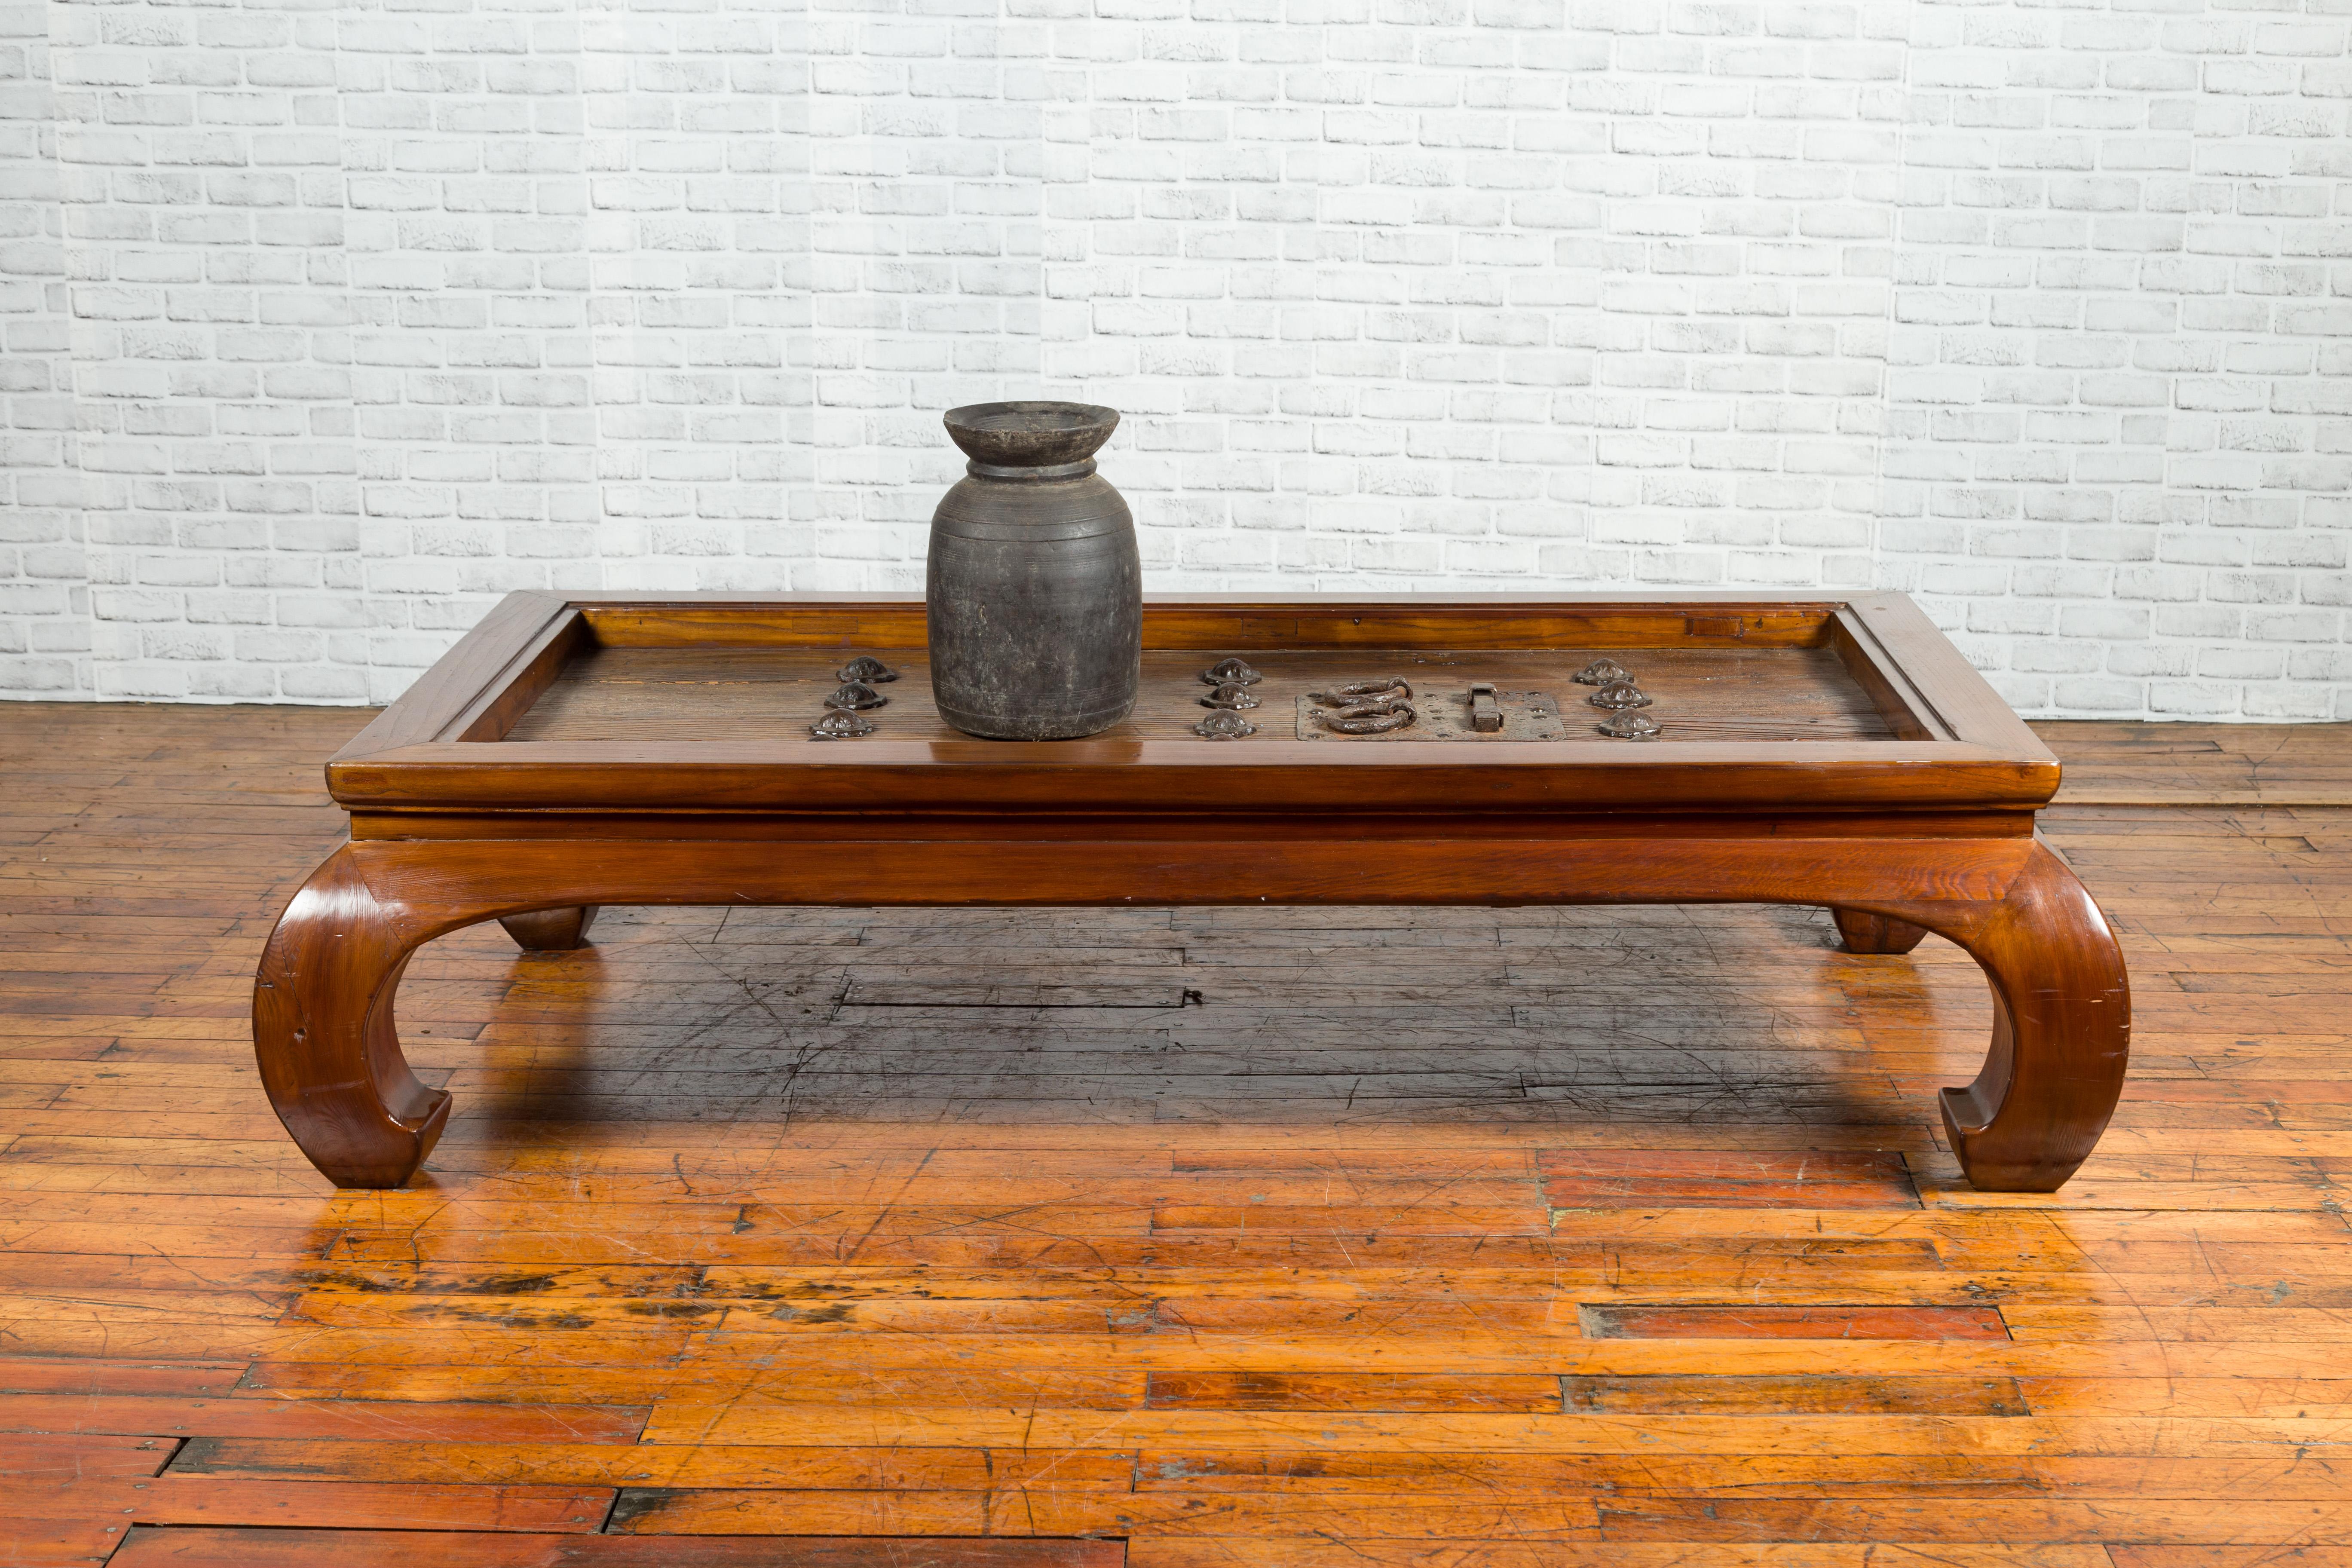 A pair of 18th or 19th century elm doors with iron hardware, fashion into a large Ming style coffee table. Created in China during the 18th or 19th century, this pair of elm doors, fitted with good iron hardware, were transformed into a coffee